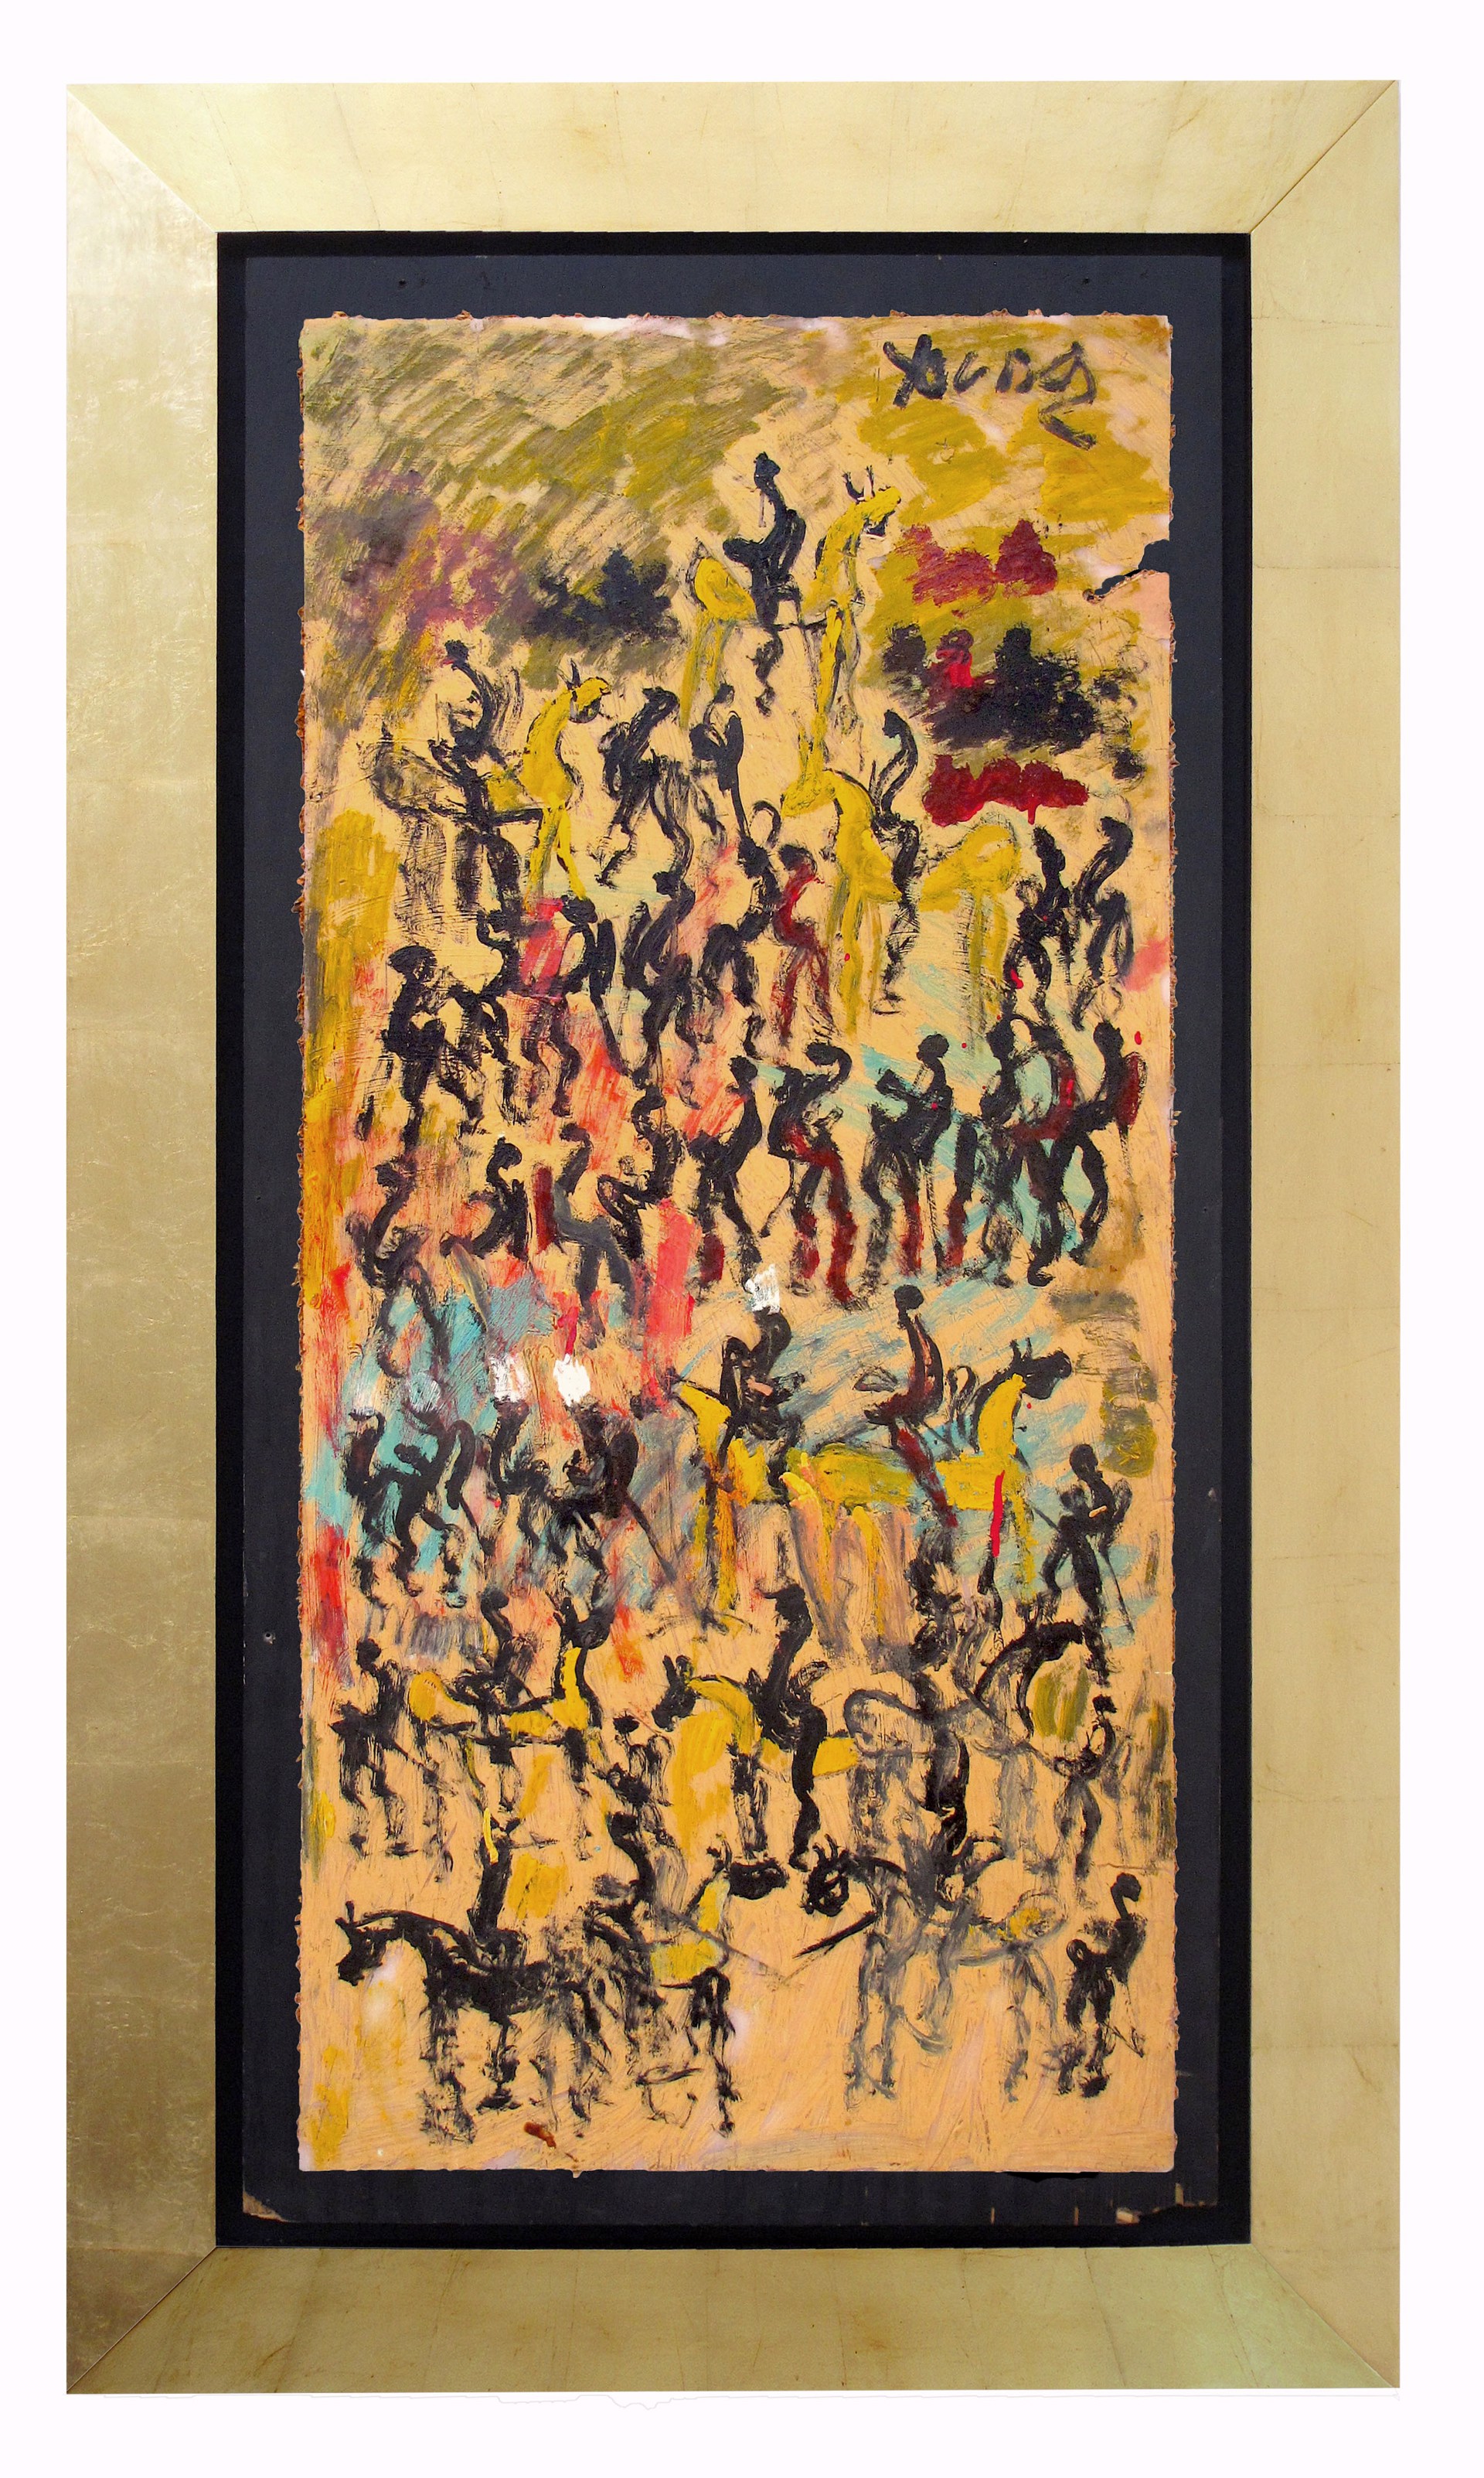 Untitled (Horses and Warriors on Yellow) by Purvis Young